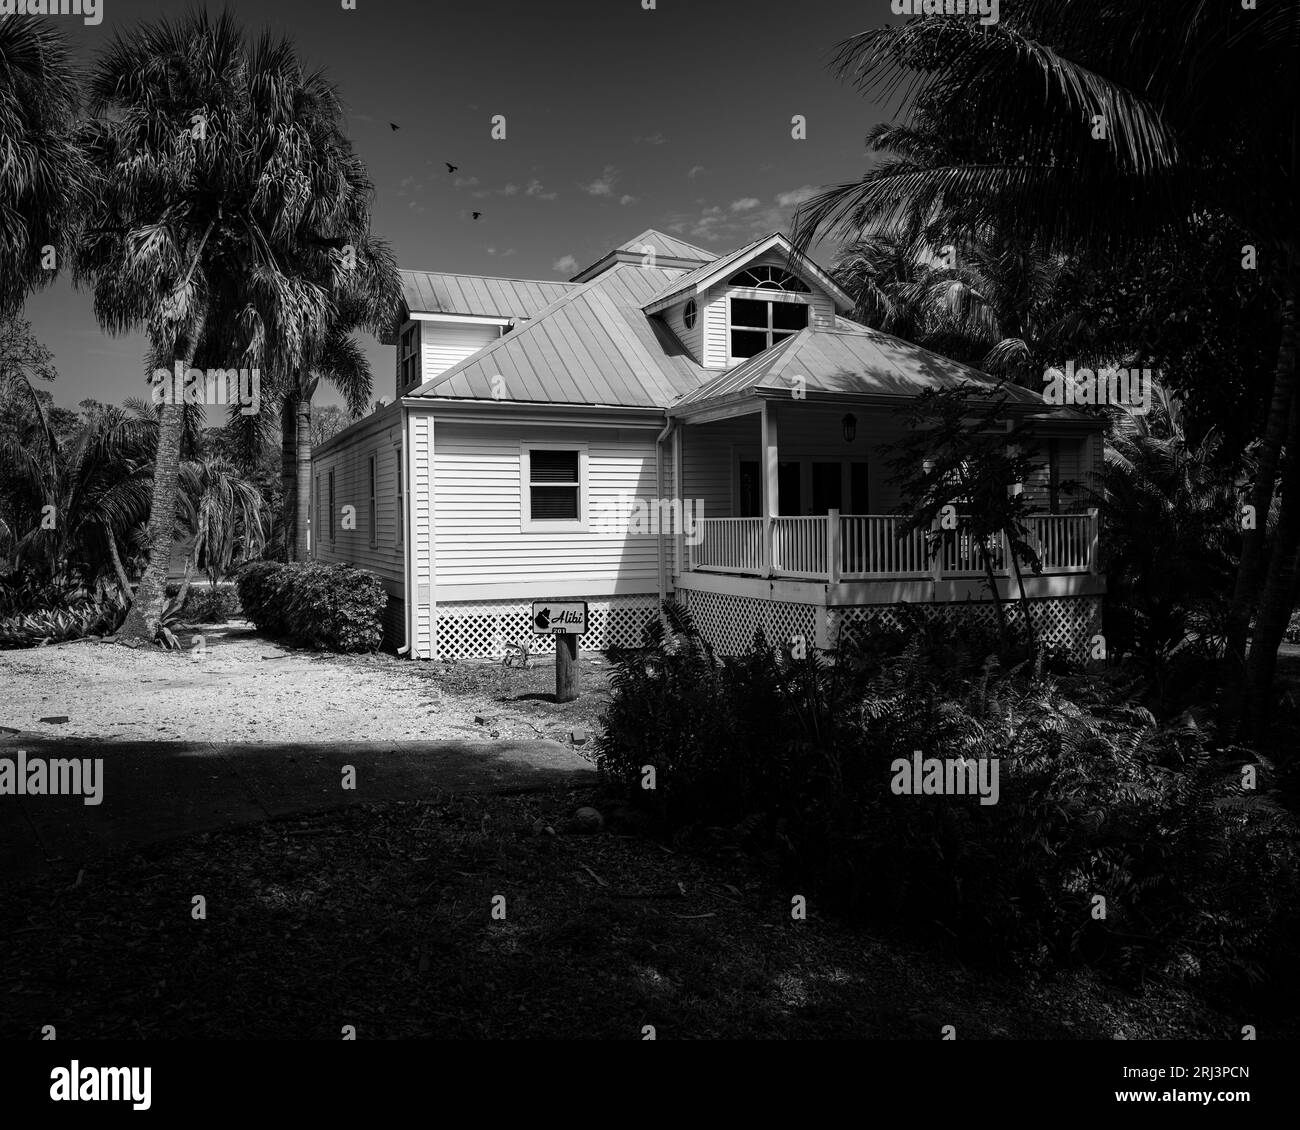 A monochrome image of a house situated in a tropical environment with shadows of a nearby palm tree visible in the background Stock Photo